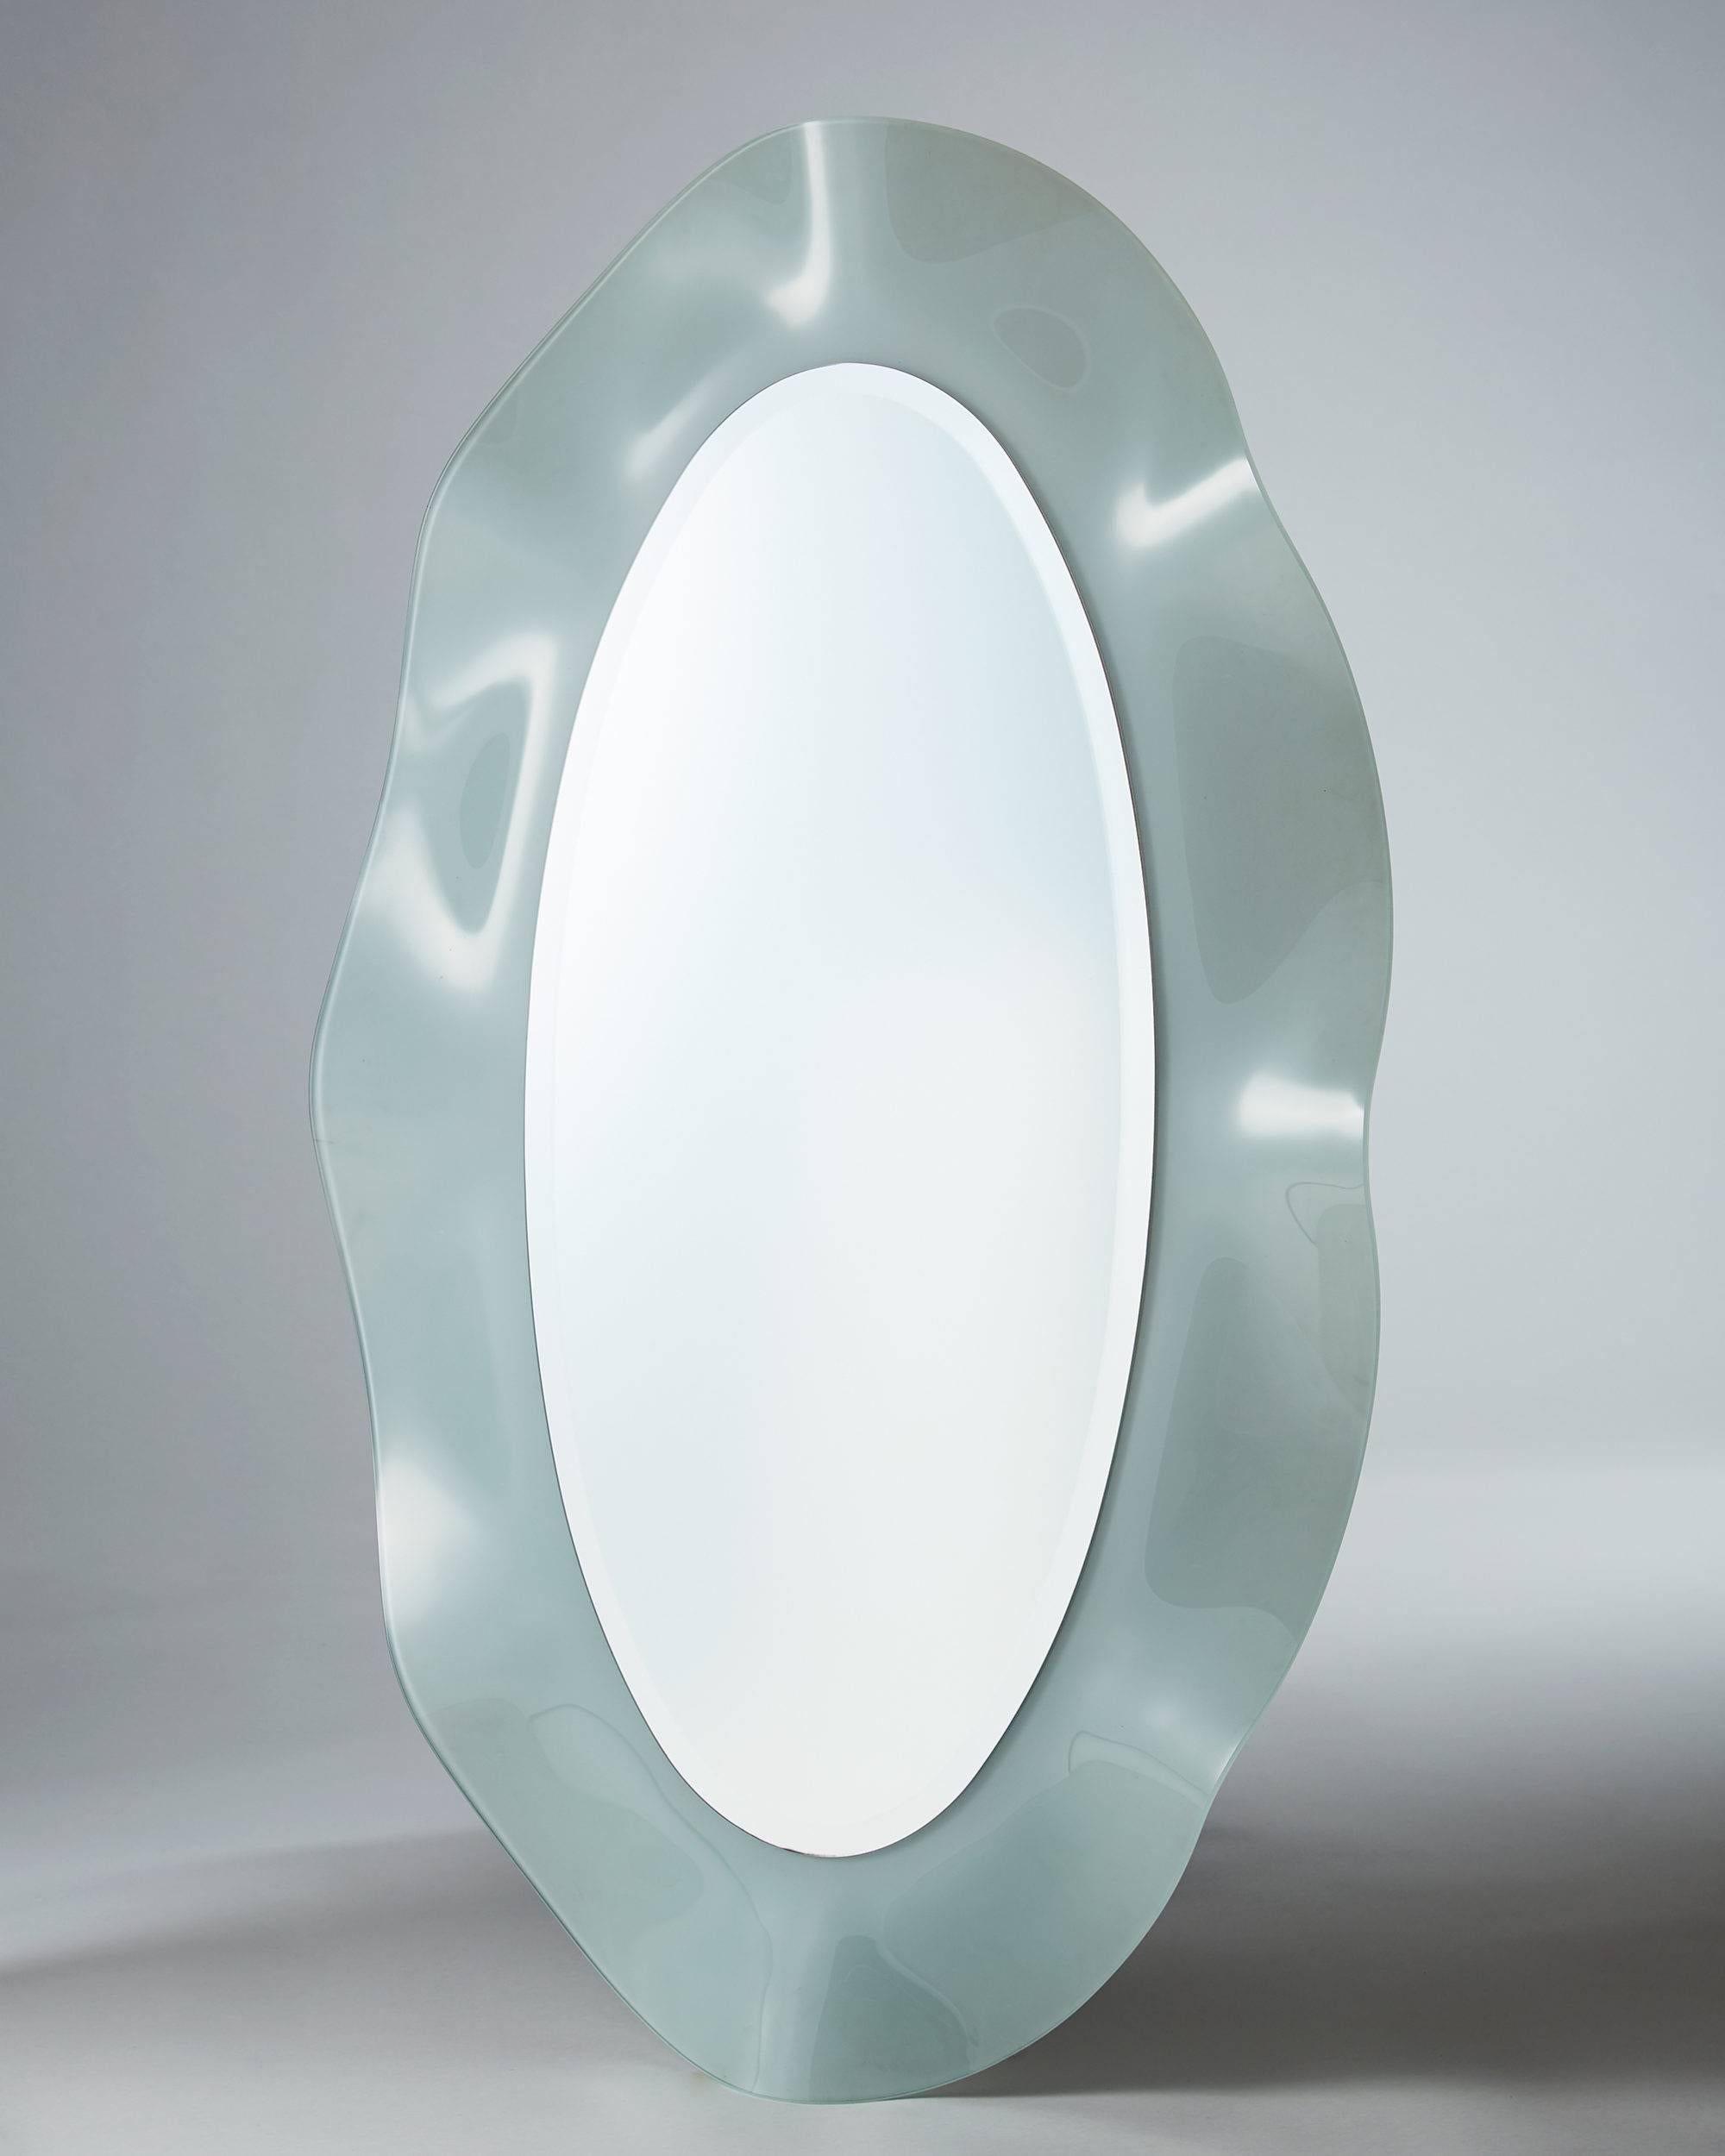 Wall mirror, 
Italy, 1980s.

Milk glass and mirrored glass.

Measures: H 125 cm/ 4' 1 1/4''
W 76 cm/ 30''.